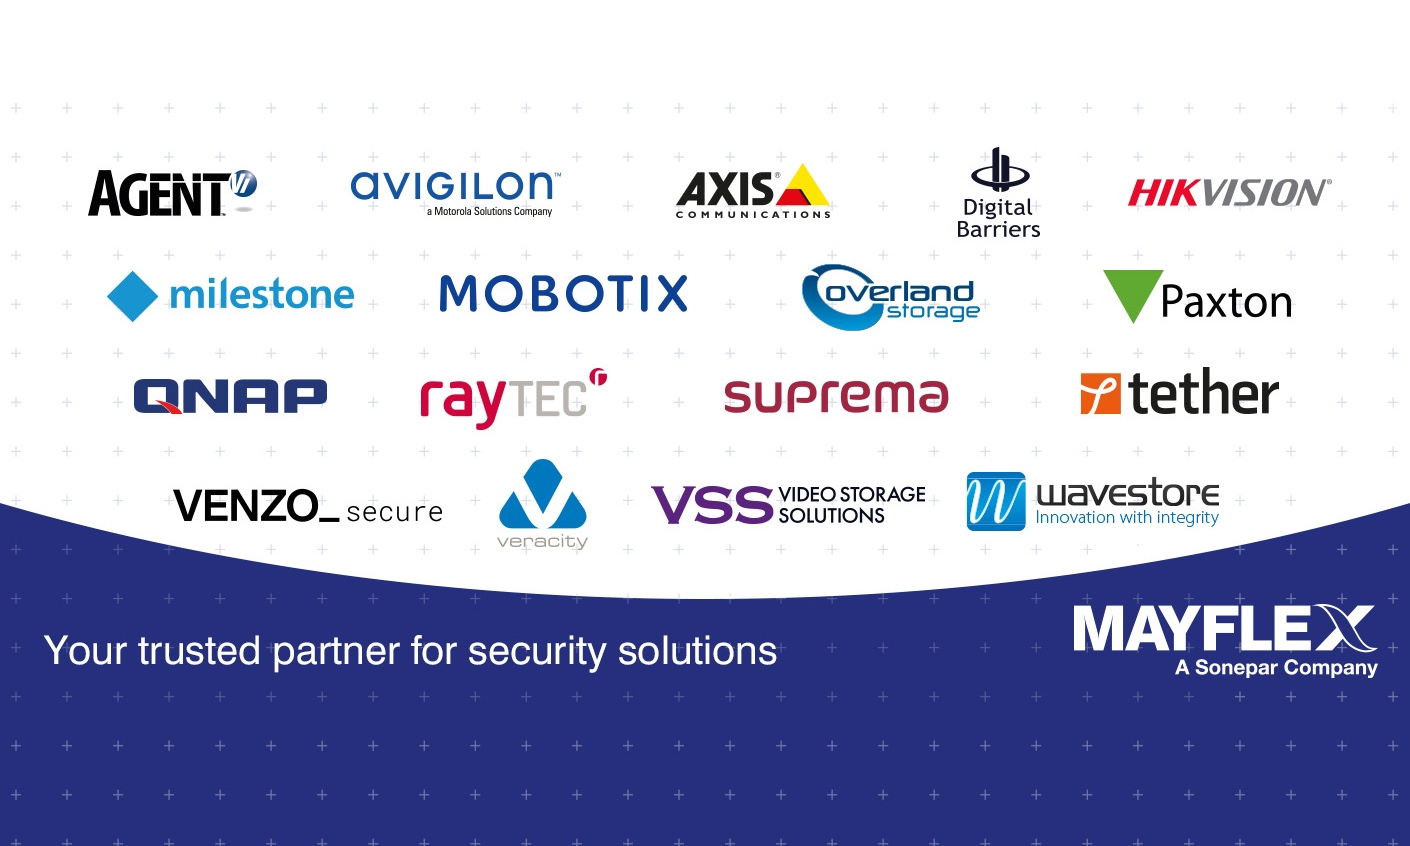 Mayflex the Trusted Partner for Security Solutions 